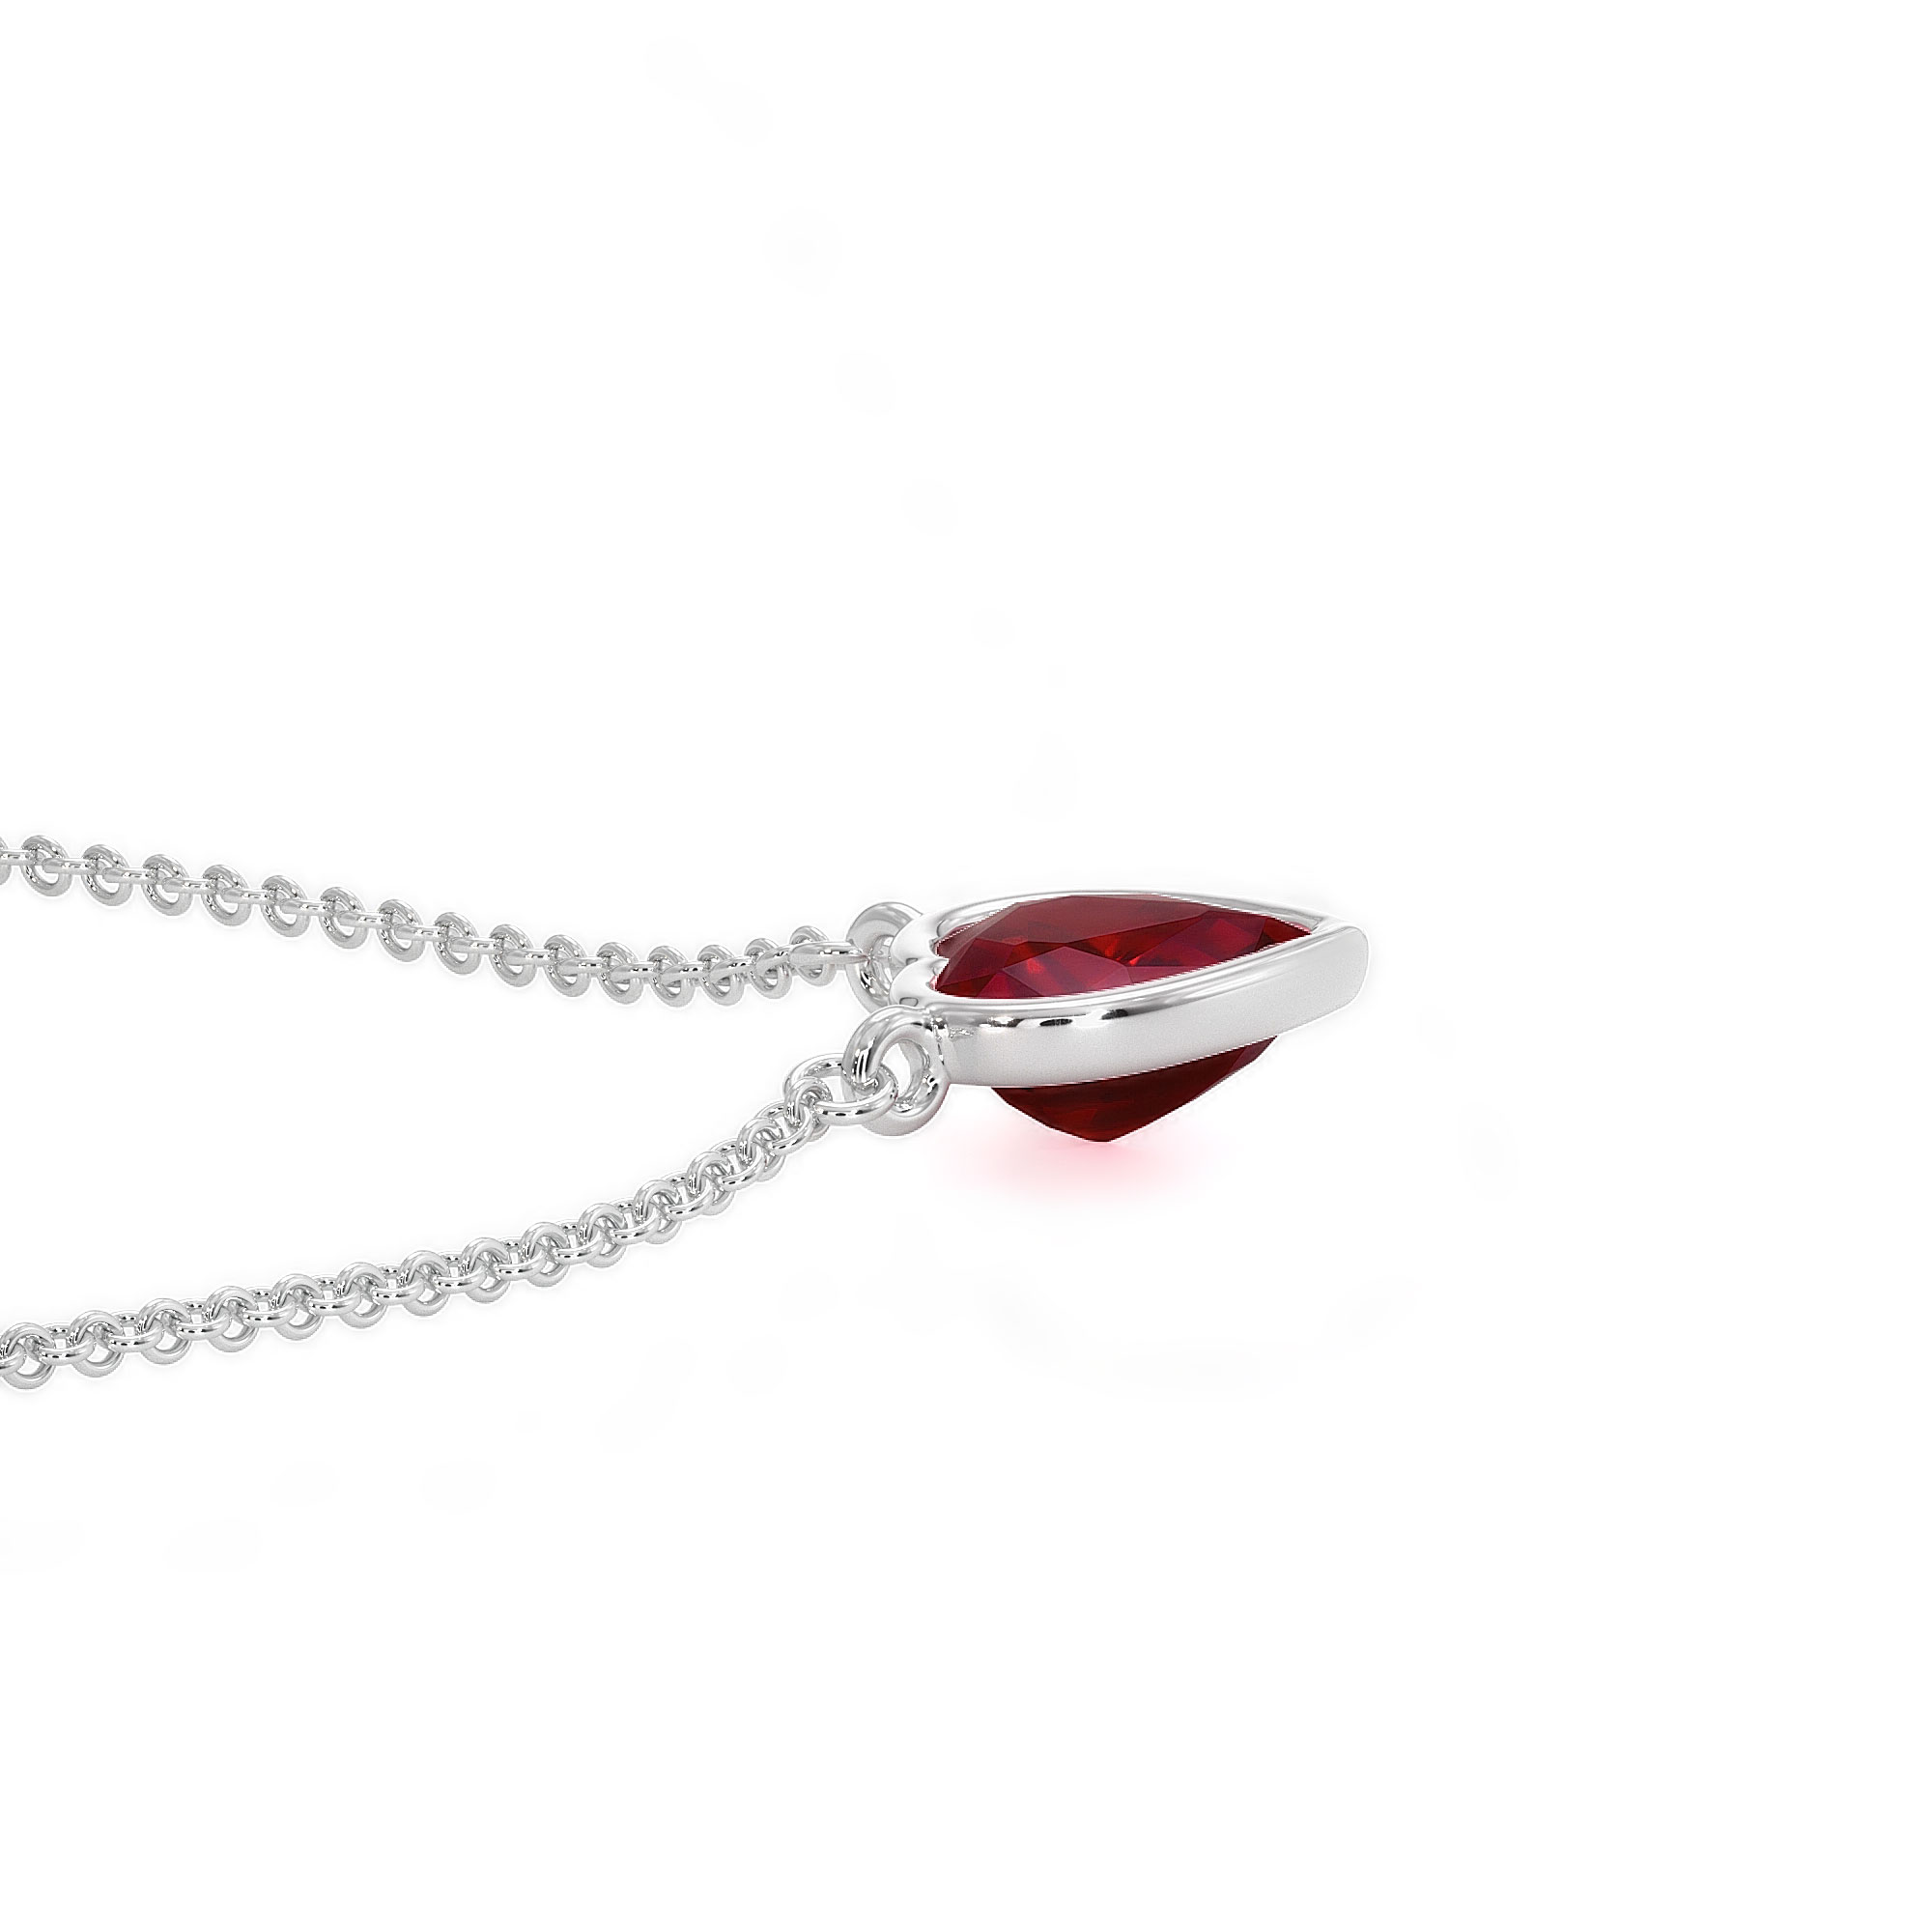 Invisible Heart Shape Ruby Necklace freeshipping - Cocobycaroline